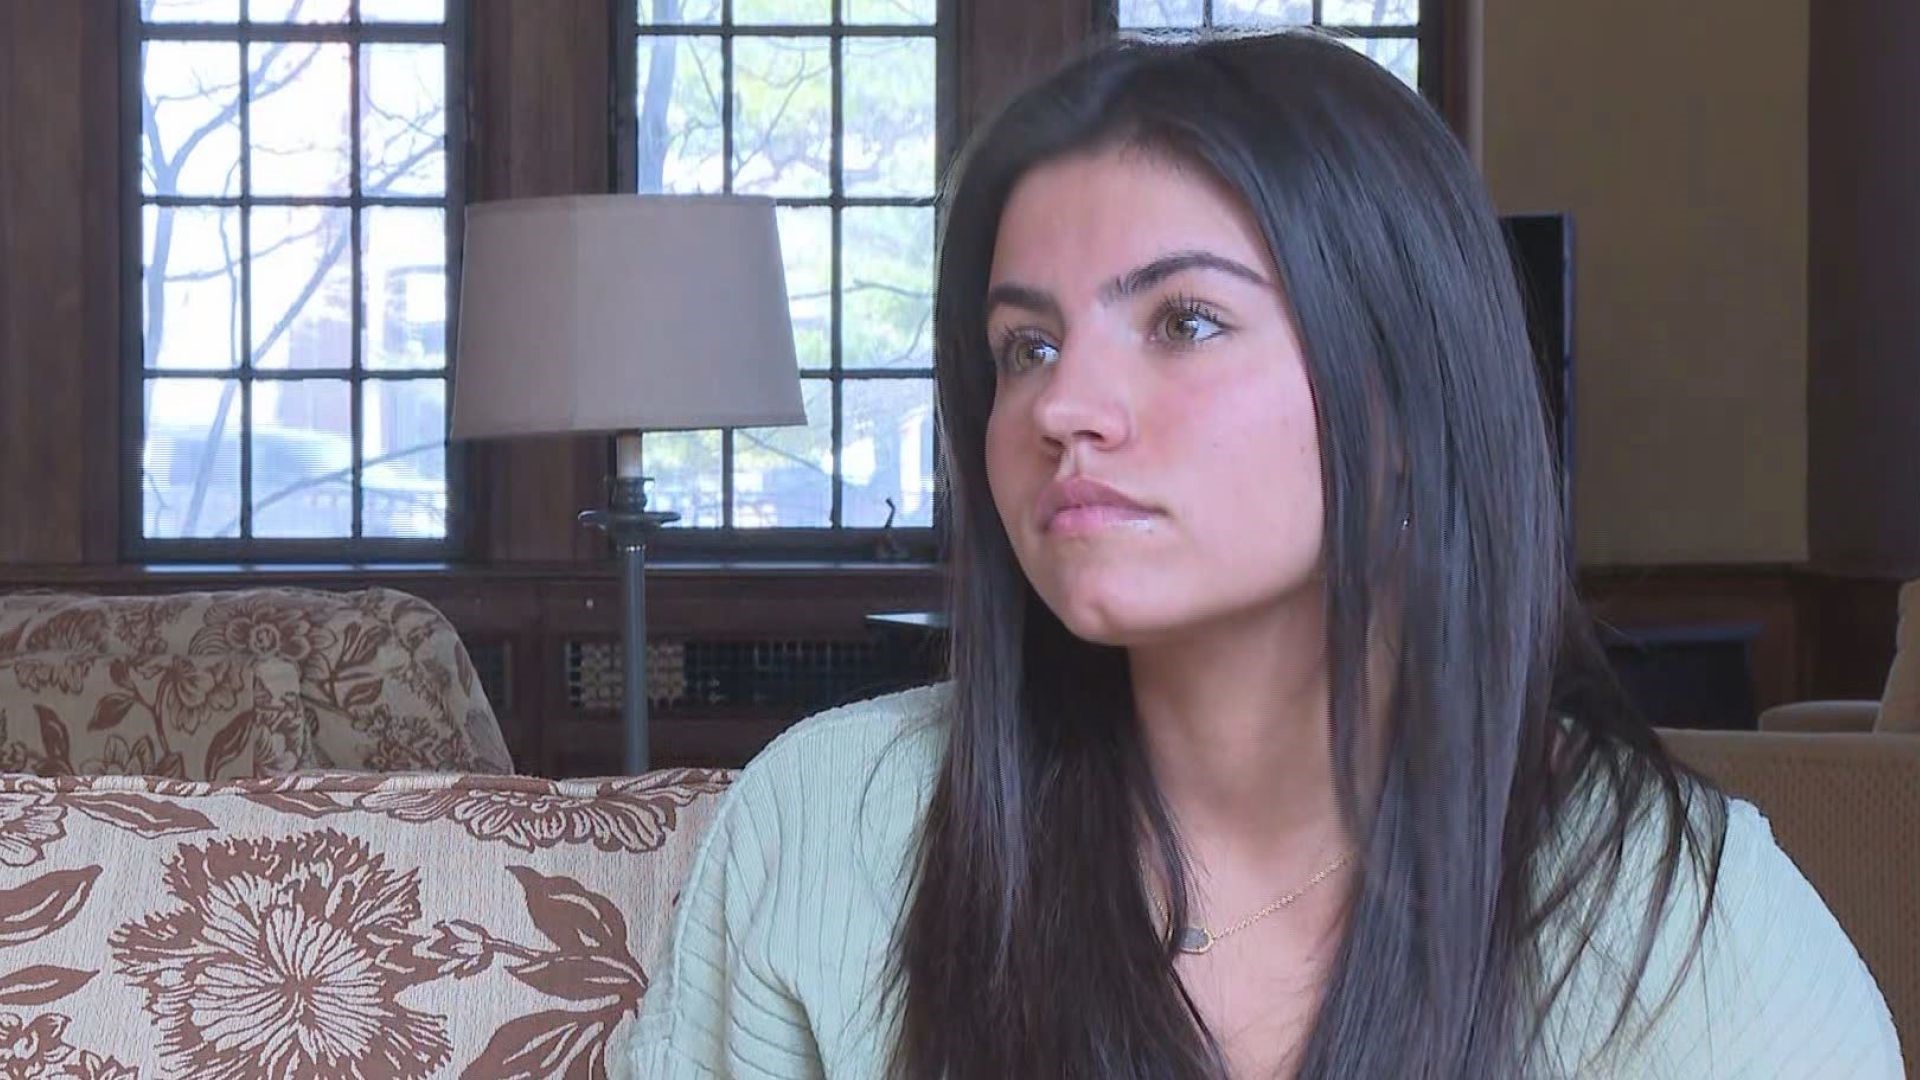 A Michigan State University student and Zeeland native is sharing her story of survival after a gunman opened fire on campus last week.